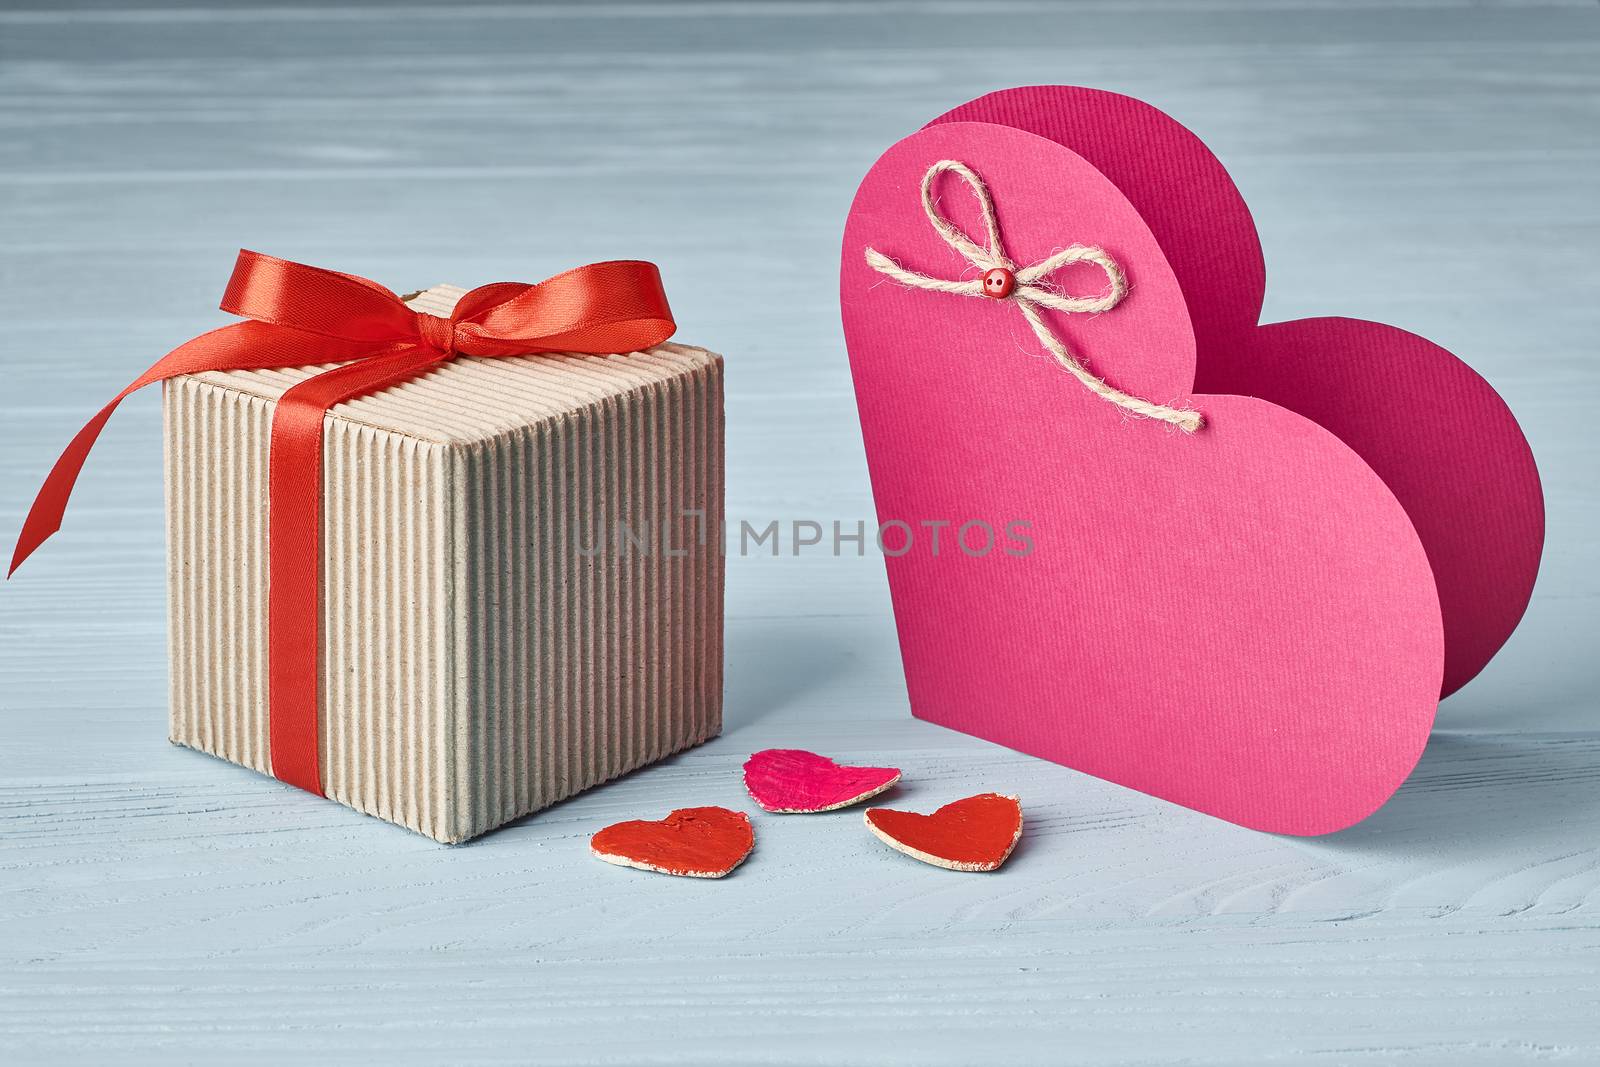 Valentines Day. Love heart, gift box, red ribbon handmade  paper card. Vintage retro romantic style. Marriage proposal concept. Unusual creative greeting card, wooden blue background, copyspace, toned